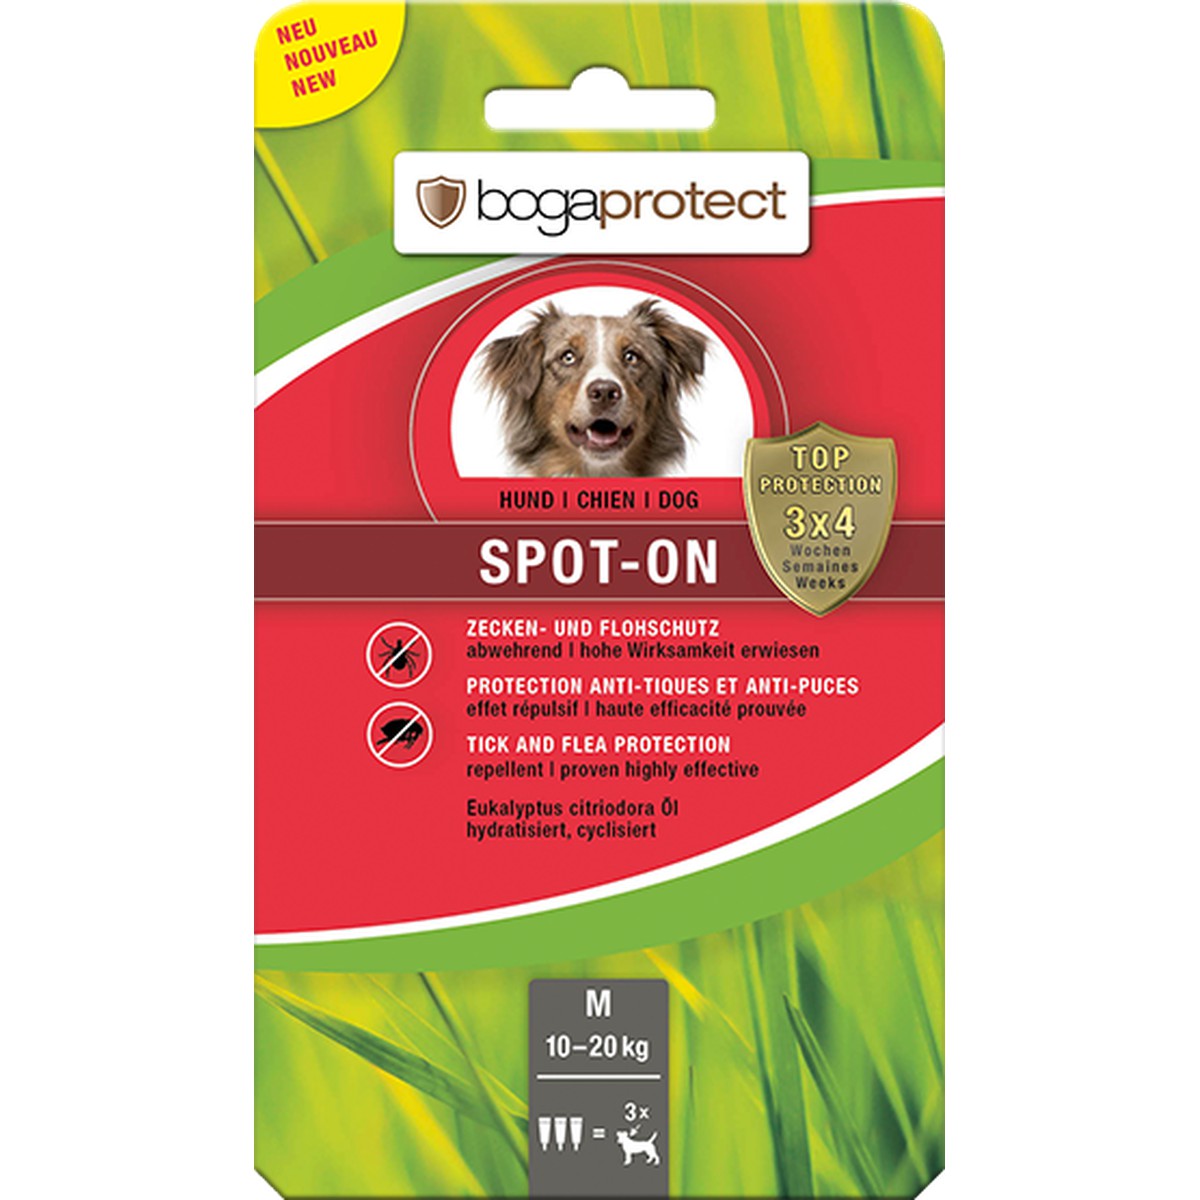   Bogaprotect Spot-On chien M  3x2.2ml